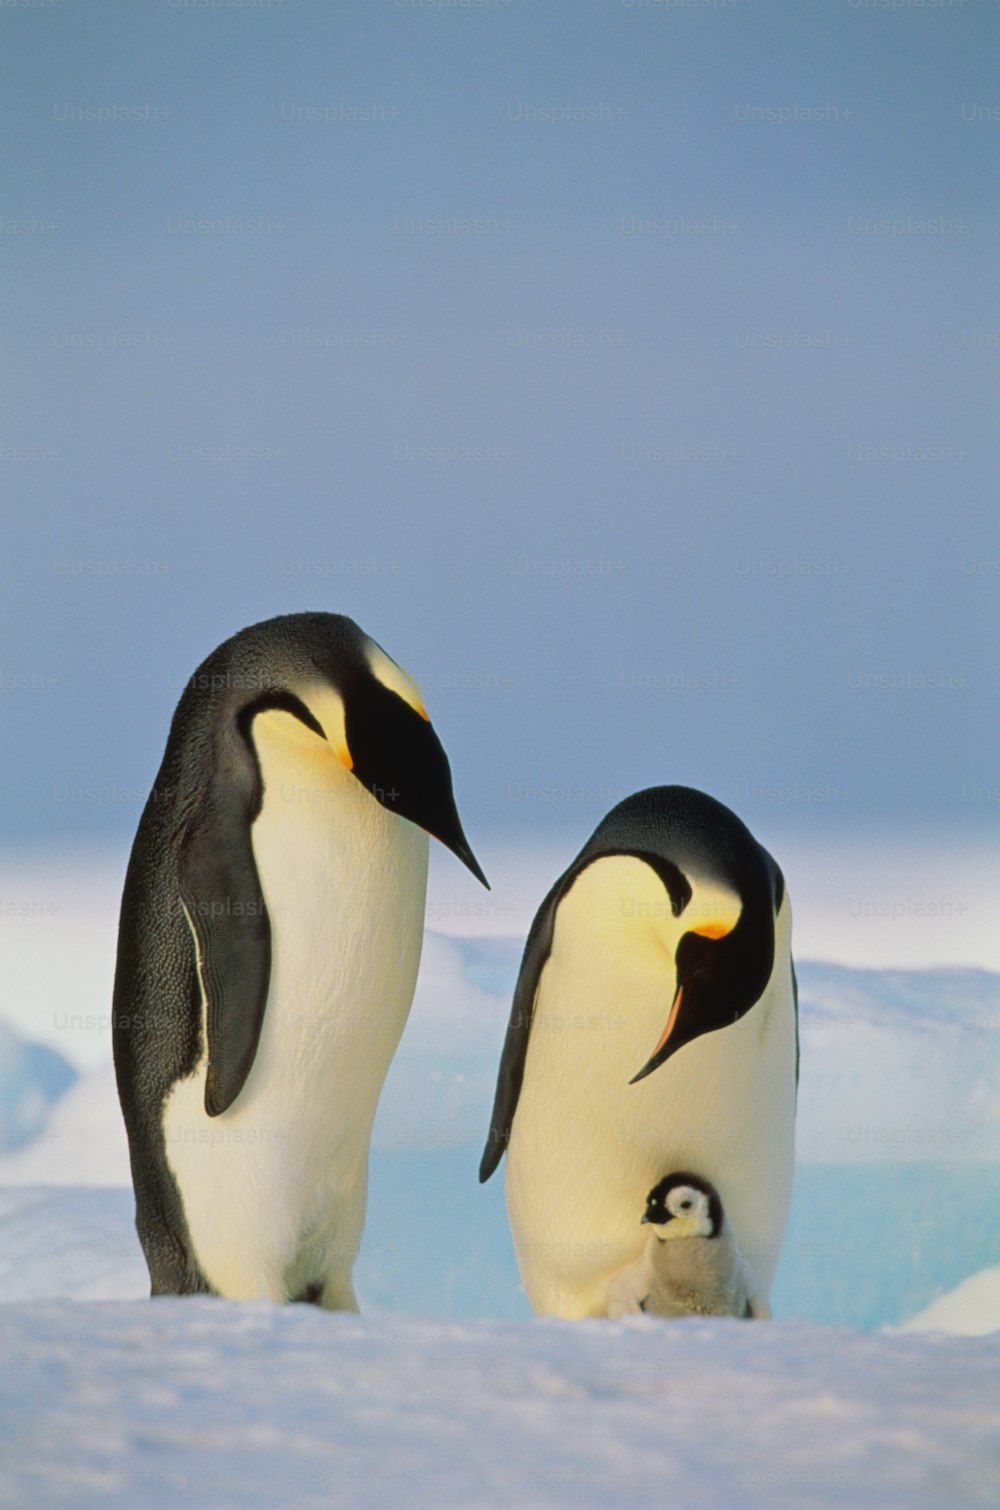 Emperor penguins are the largest species of penguin. As with all penguins they cannot fly but are strong swimmers. Emperor penguins live on the ice of Antarctica.